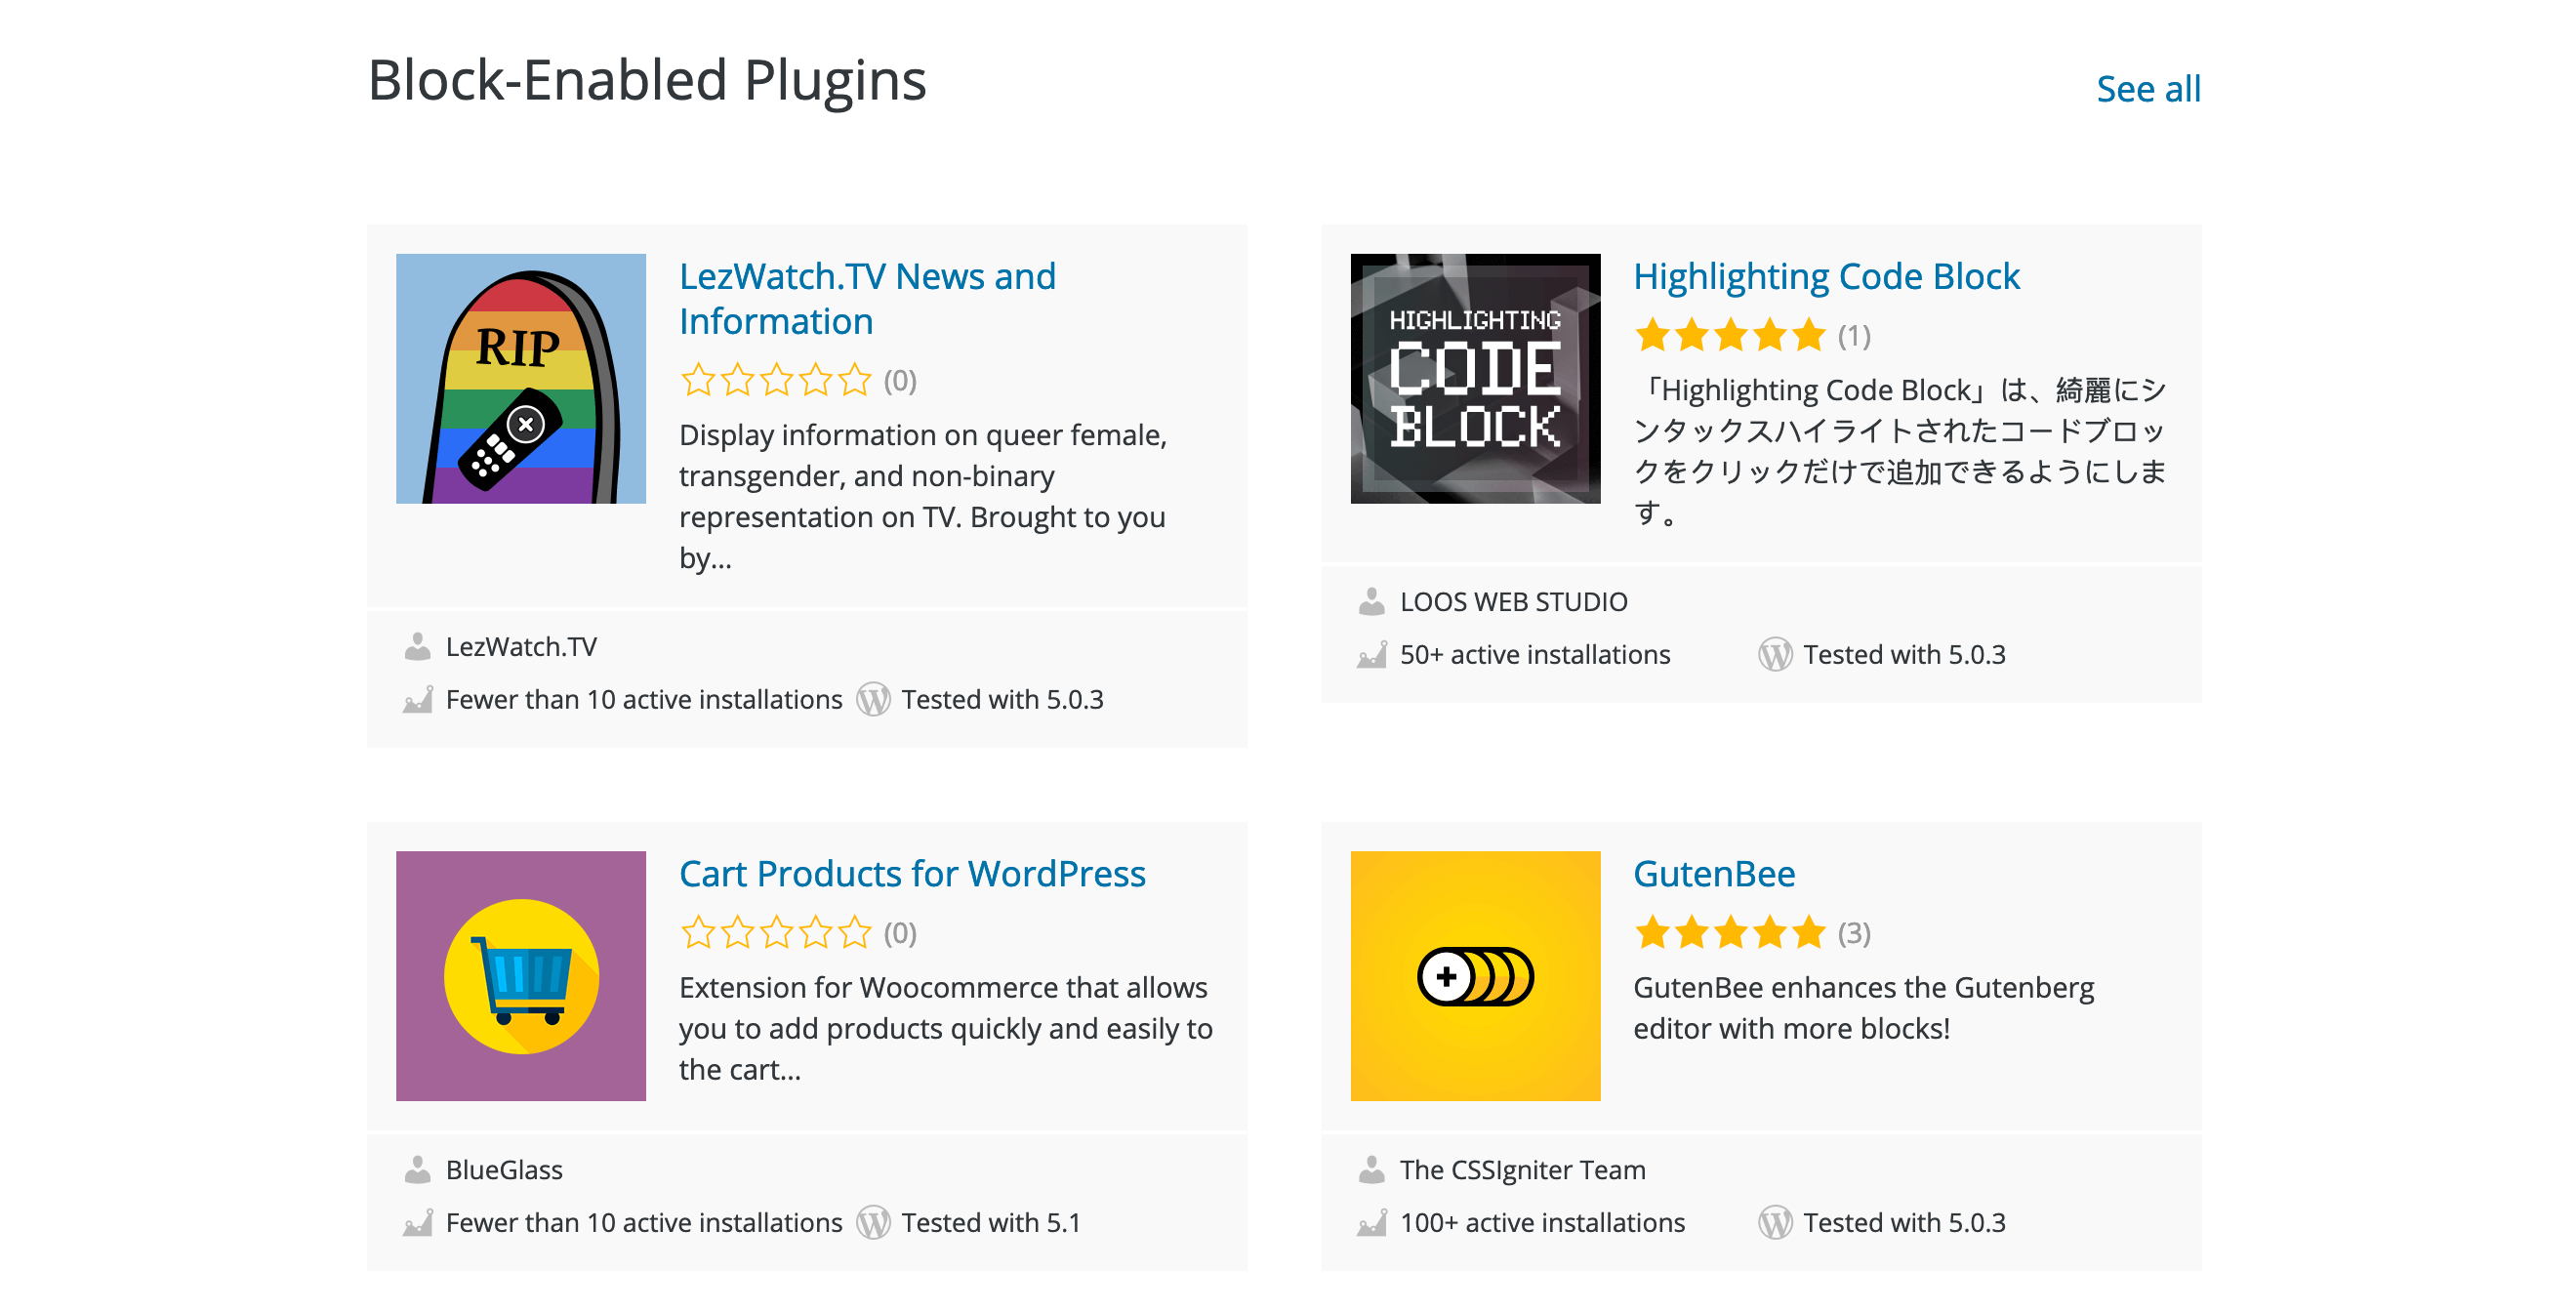 The Block-Enabled page on WordPress.org.